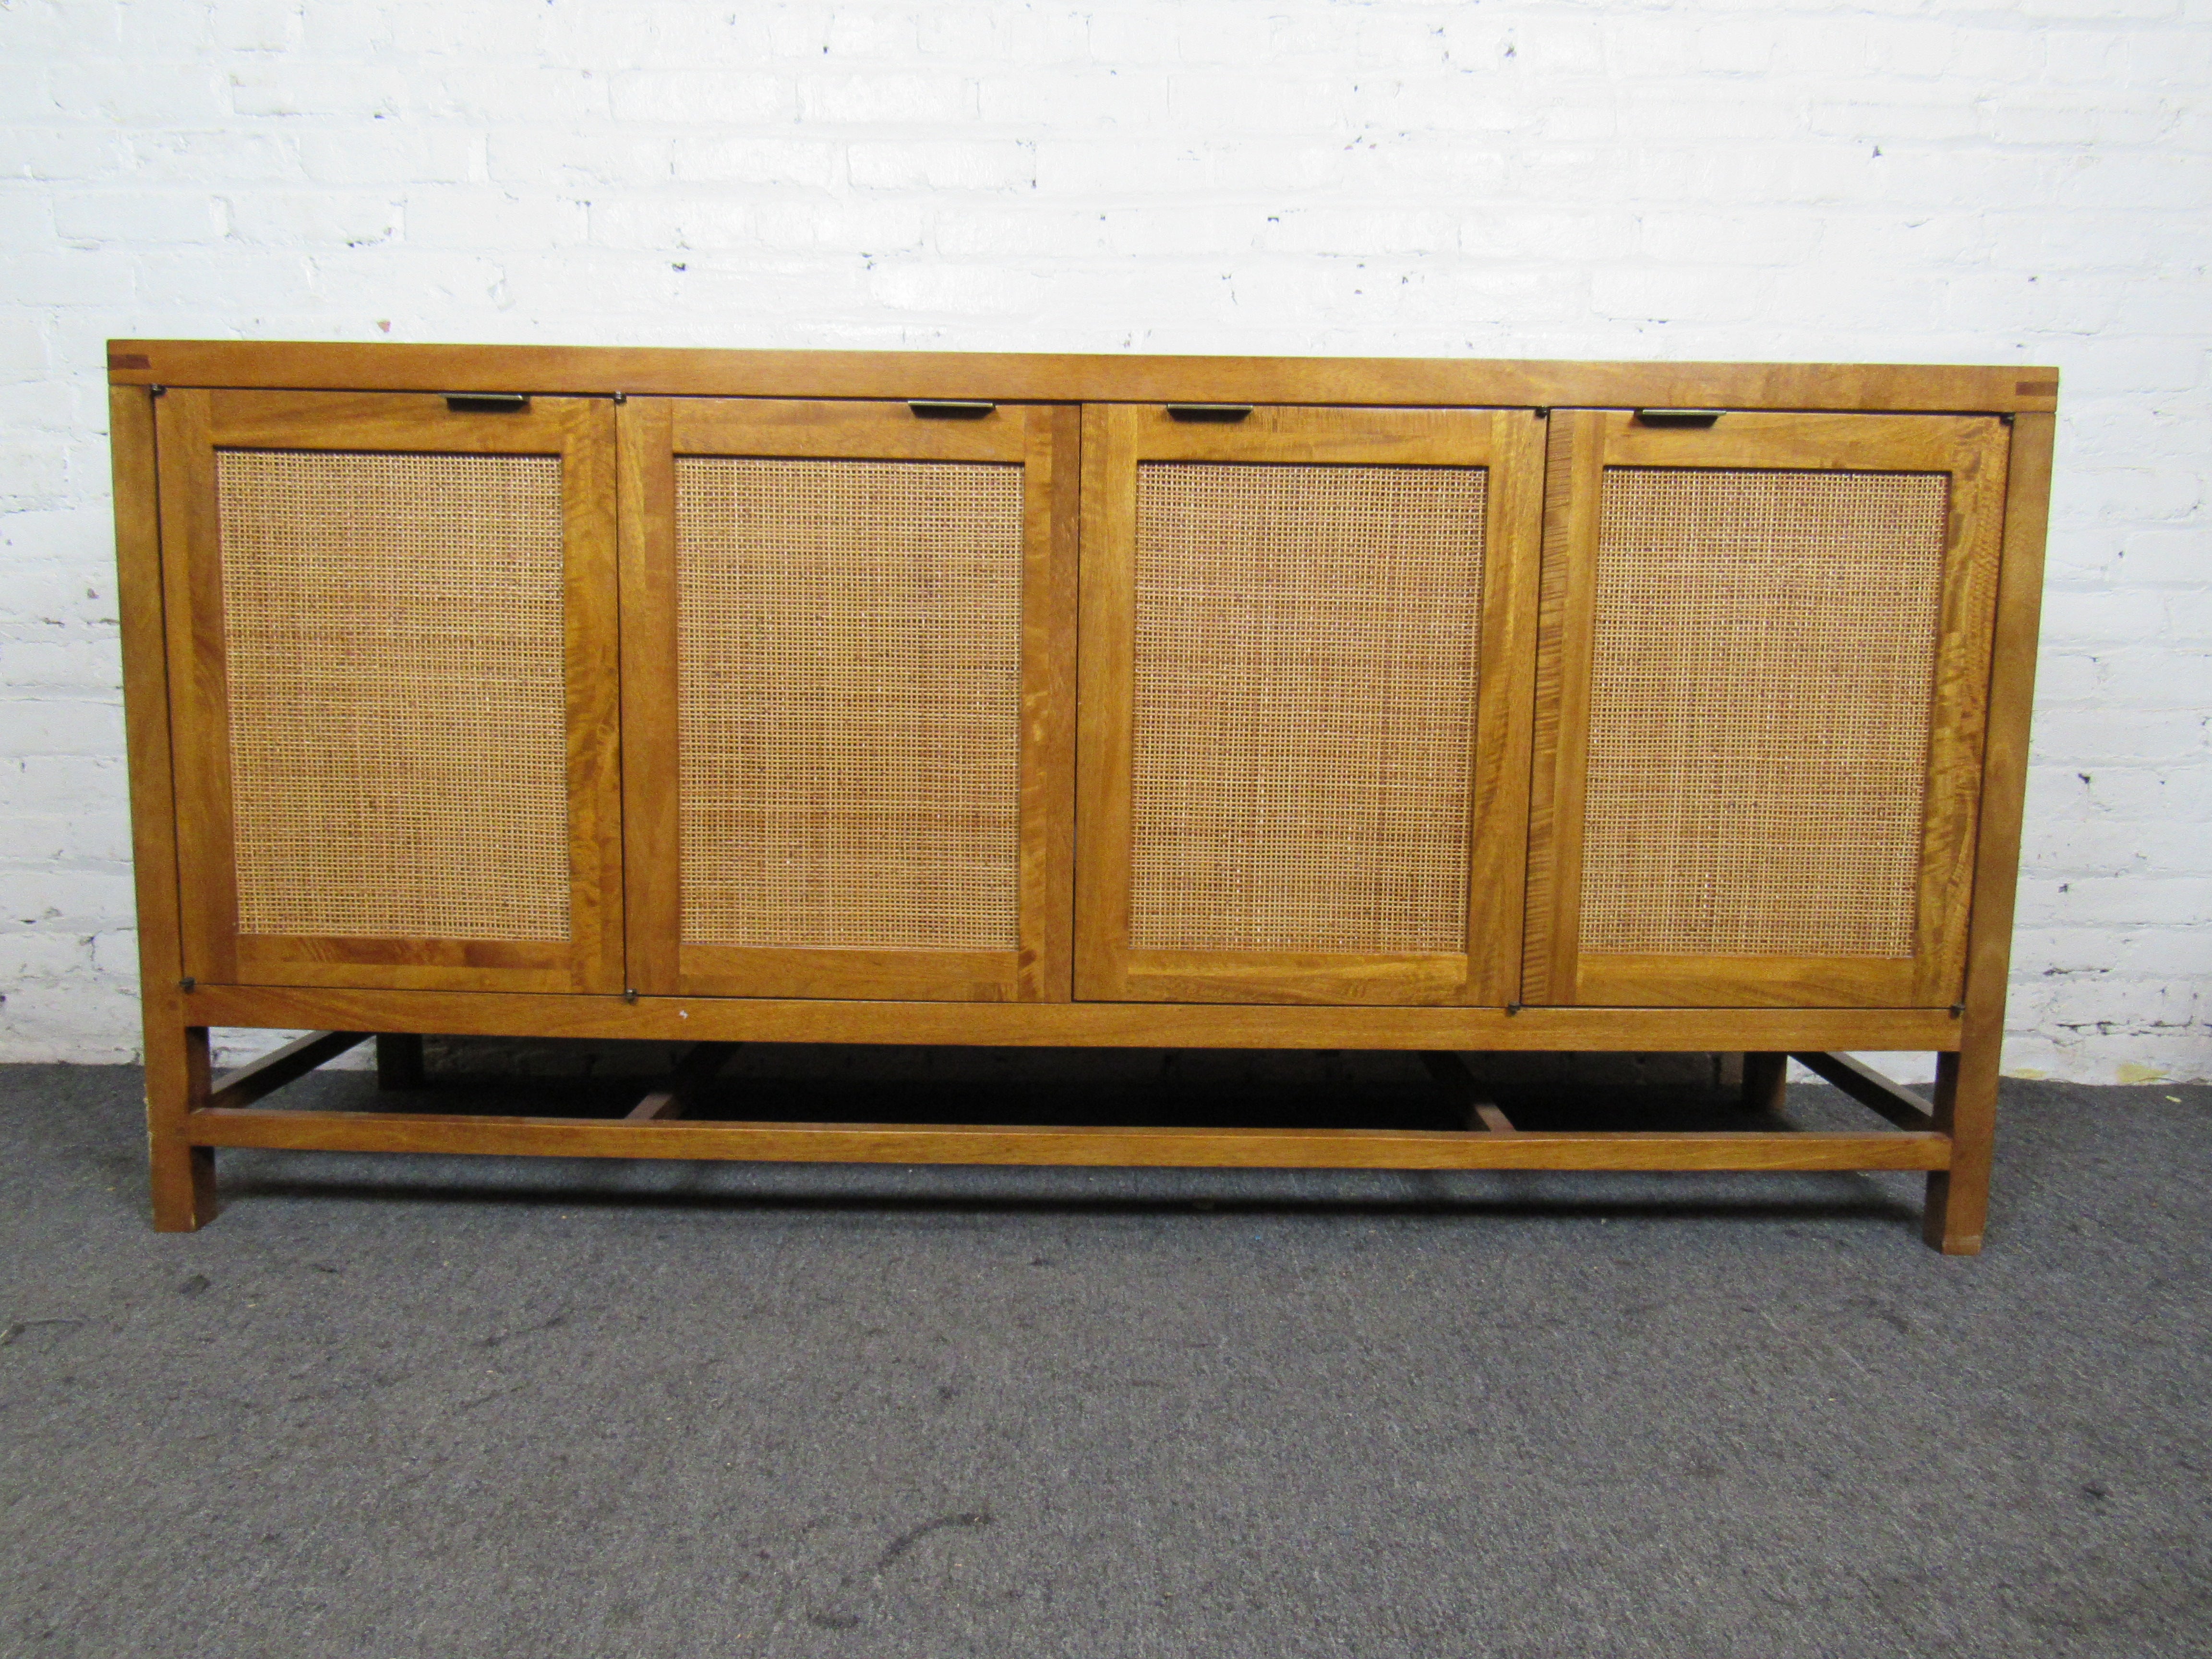 This vintage long cabinet combines woven front panels with an elegant Mid-Century Modern design. Four doors open to reveal large storage compartments for organization and functionality. Please confirm item location with seller (NY/NJ).